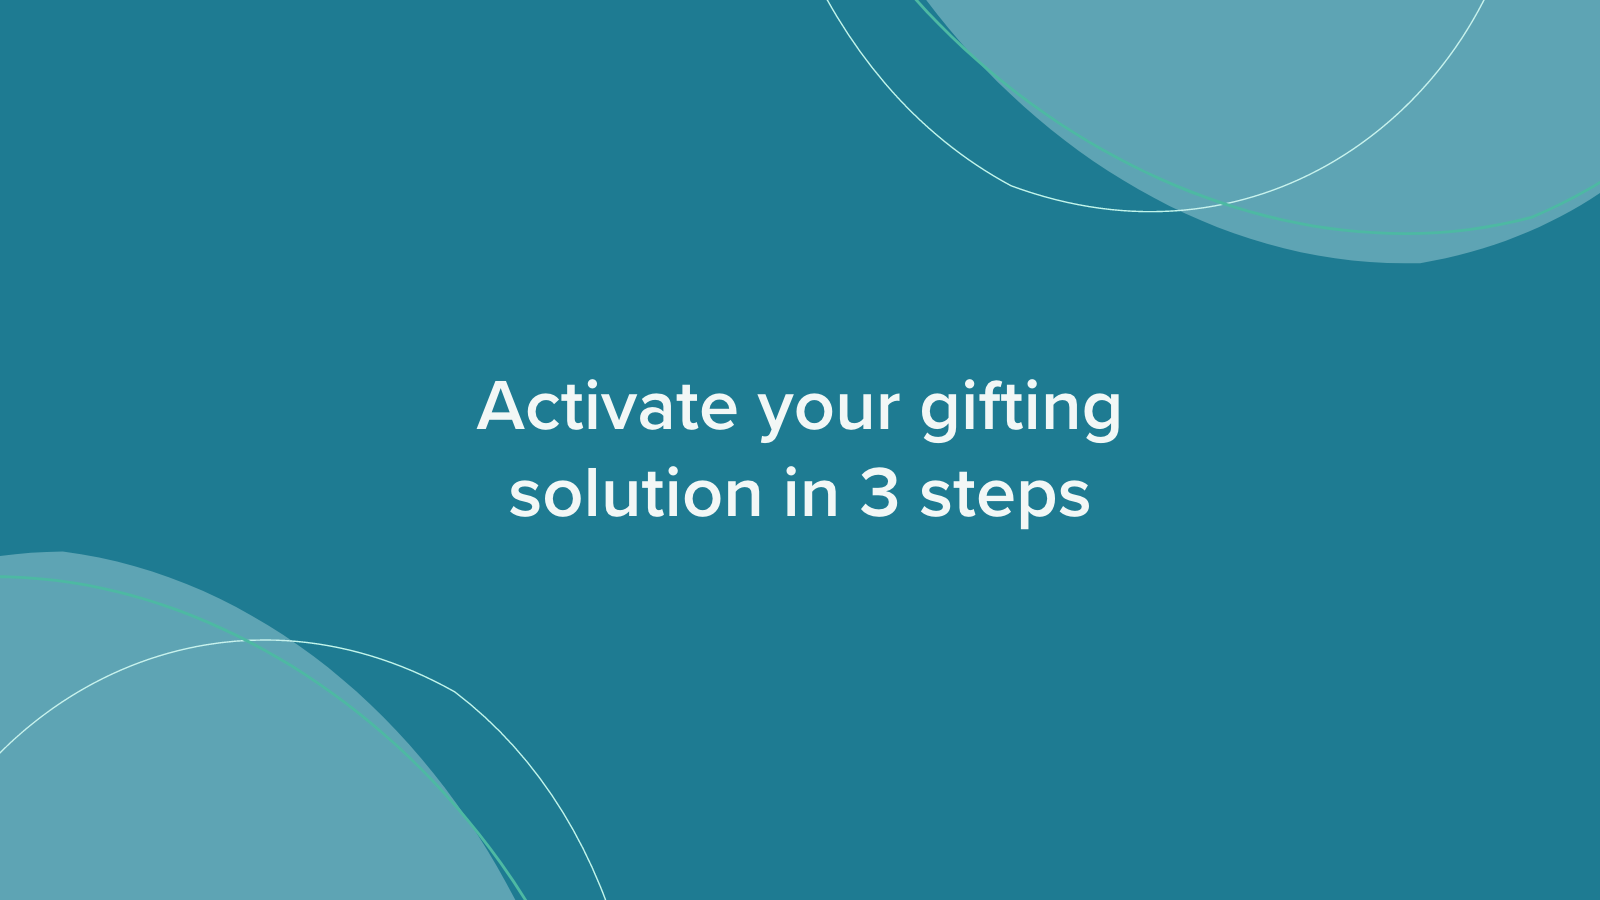 Activate your gifting solution in 3 steps